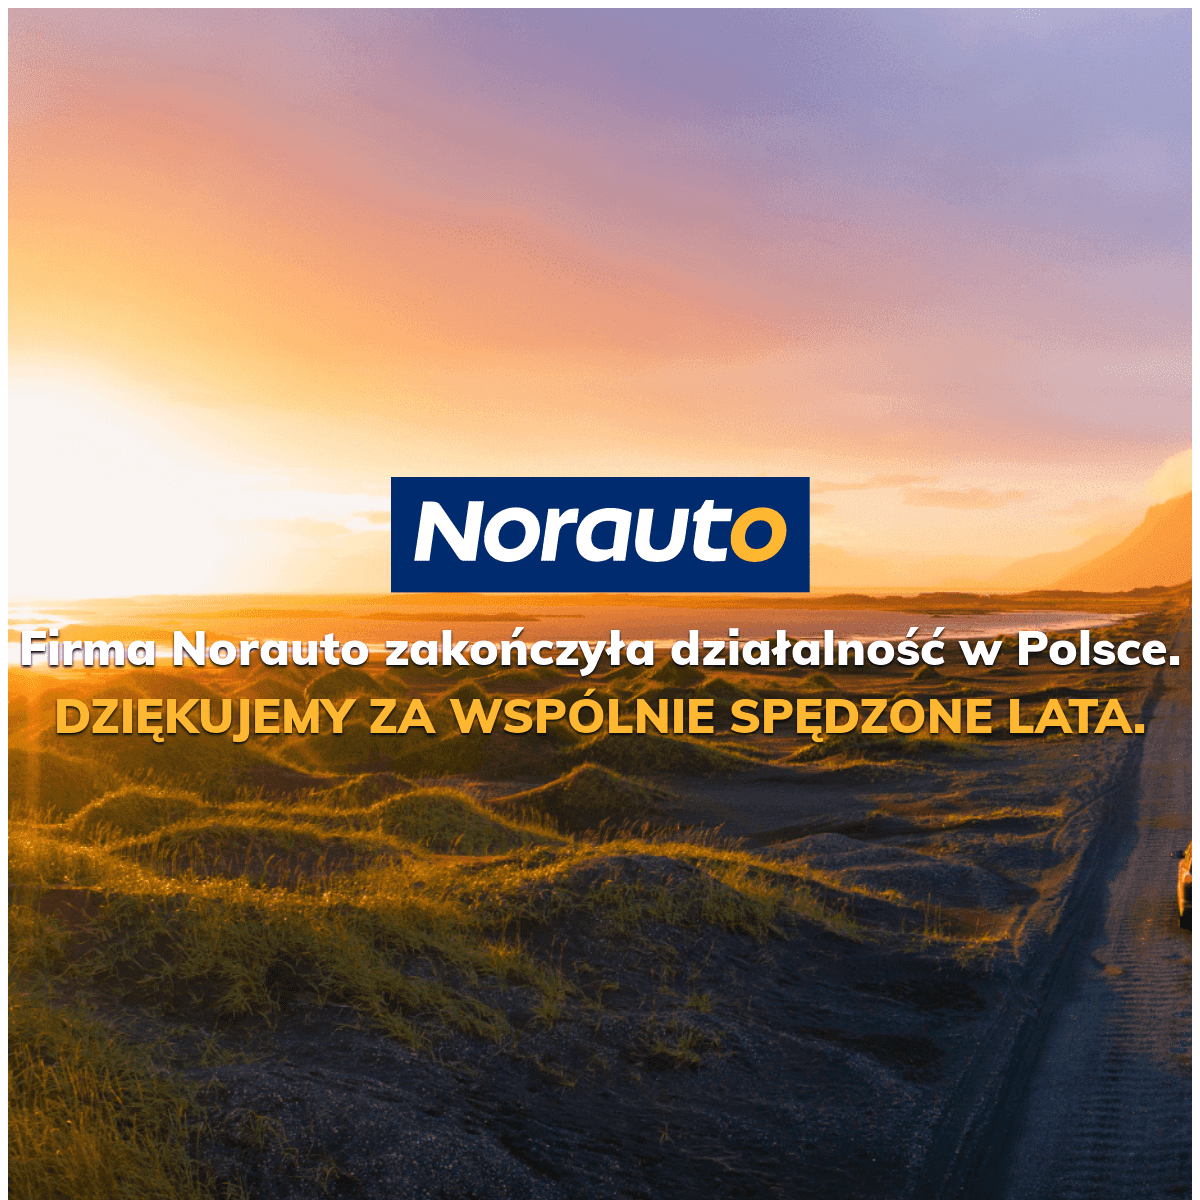 A complete backup of https://norauto.pl